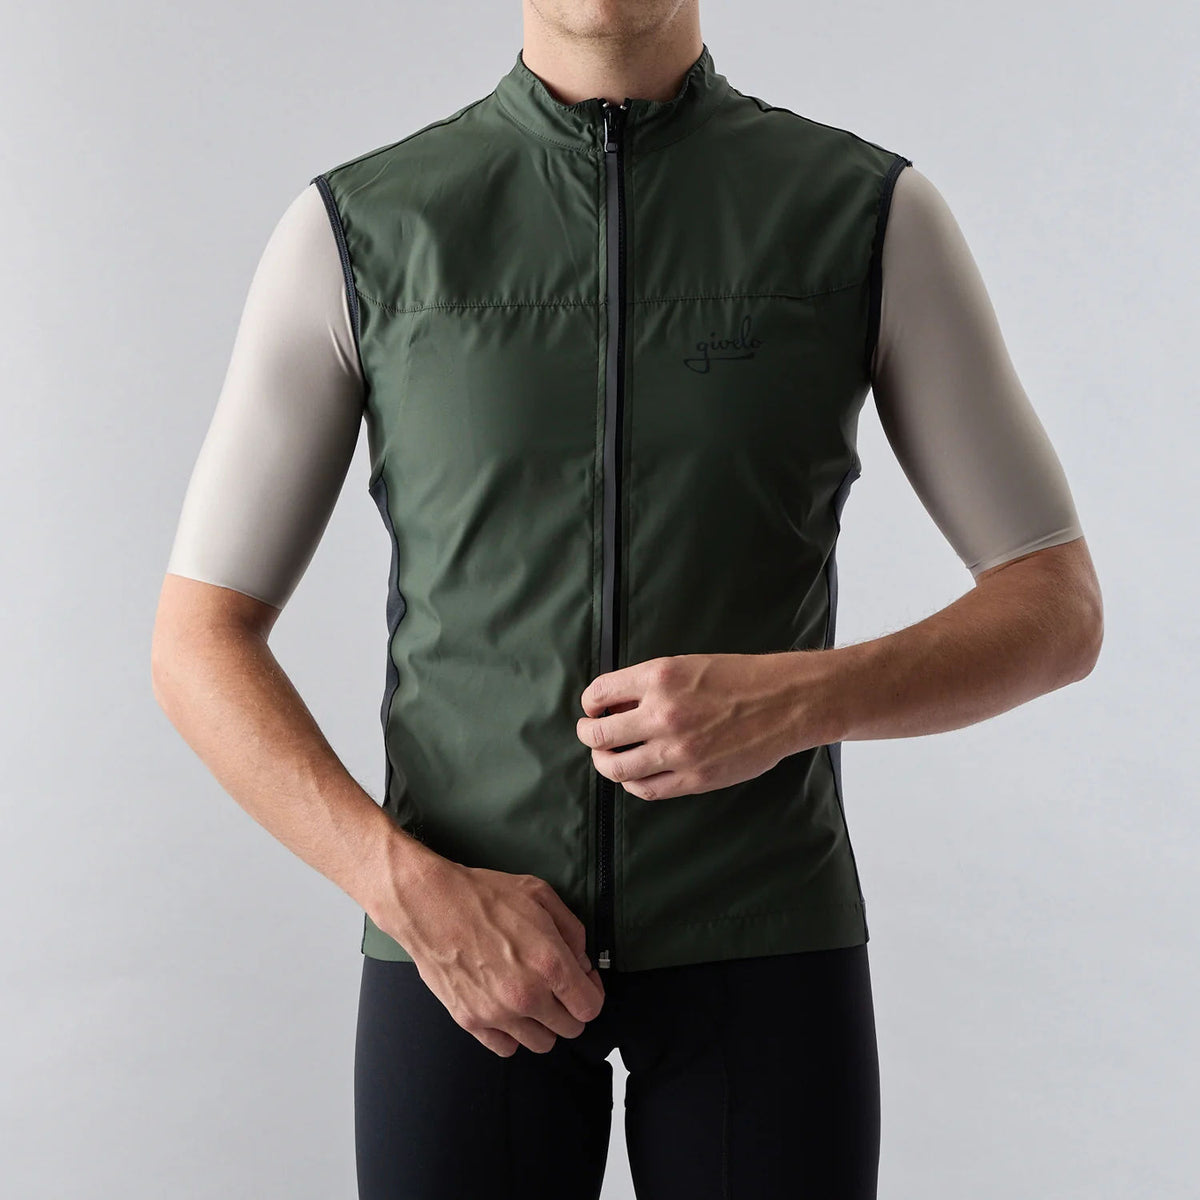 Givelo Quick-Free Gilet Military Green メンズ サイクルジレ | GEARED